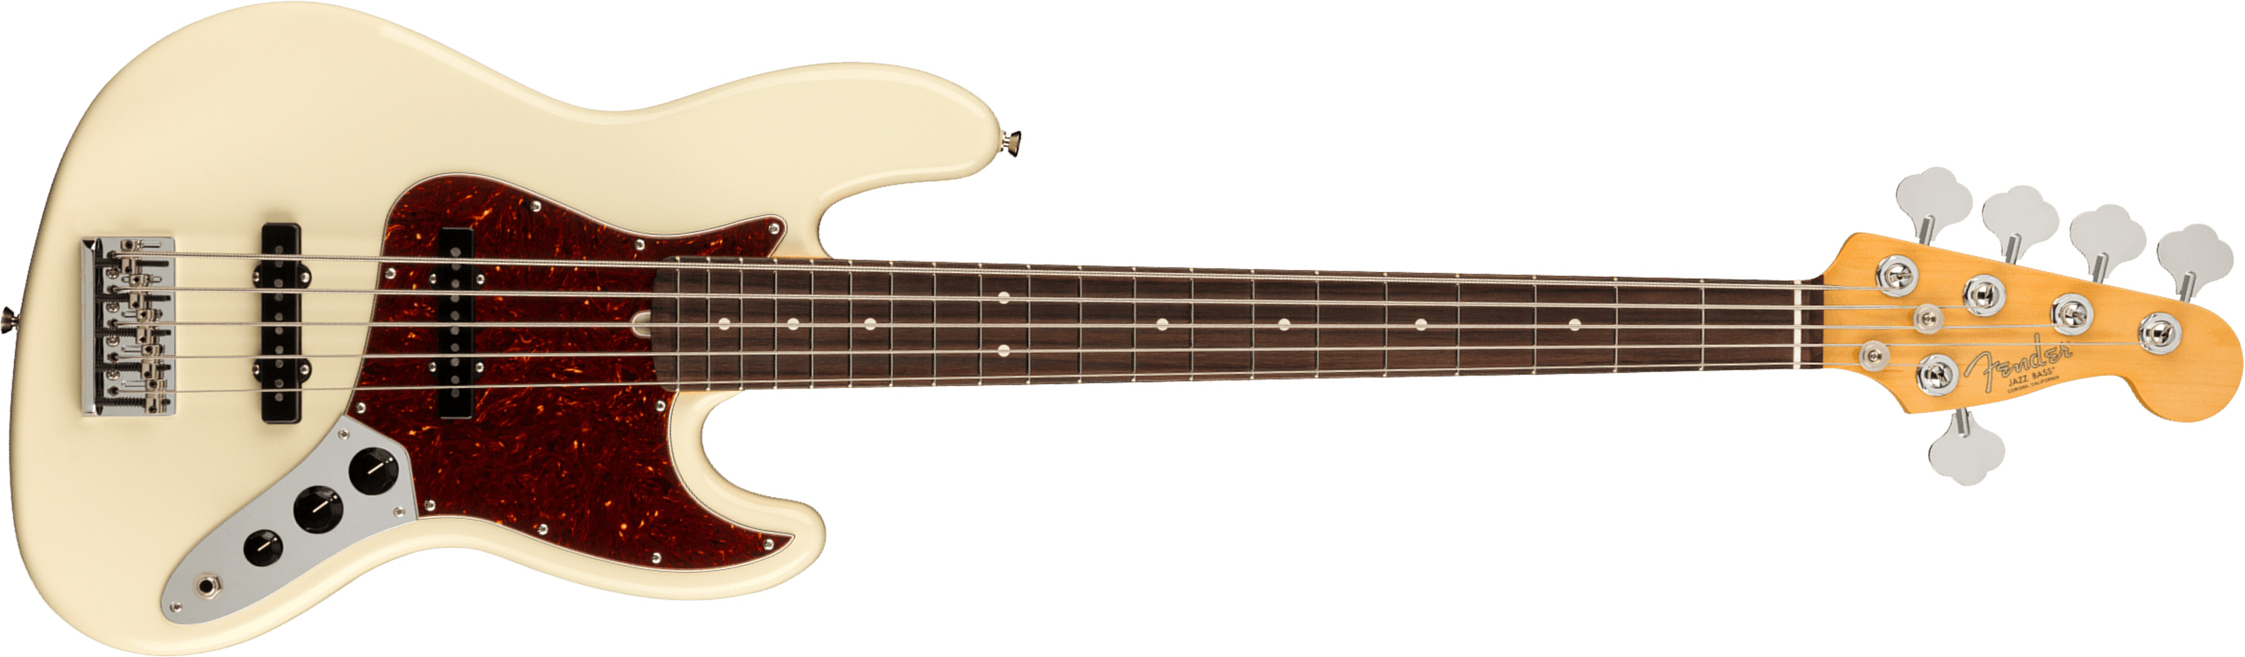 Fender Jazz Bass V American Professional Ii Usa 5-cordes Rw - Olympic White - Solid body elektrische bas - Main picture